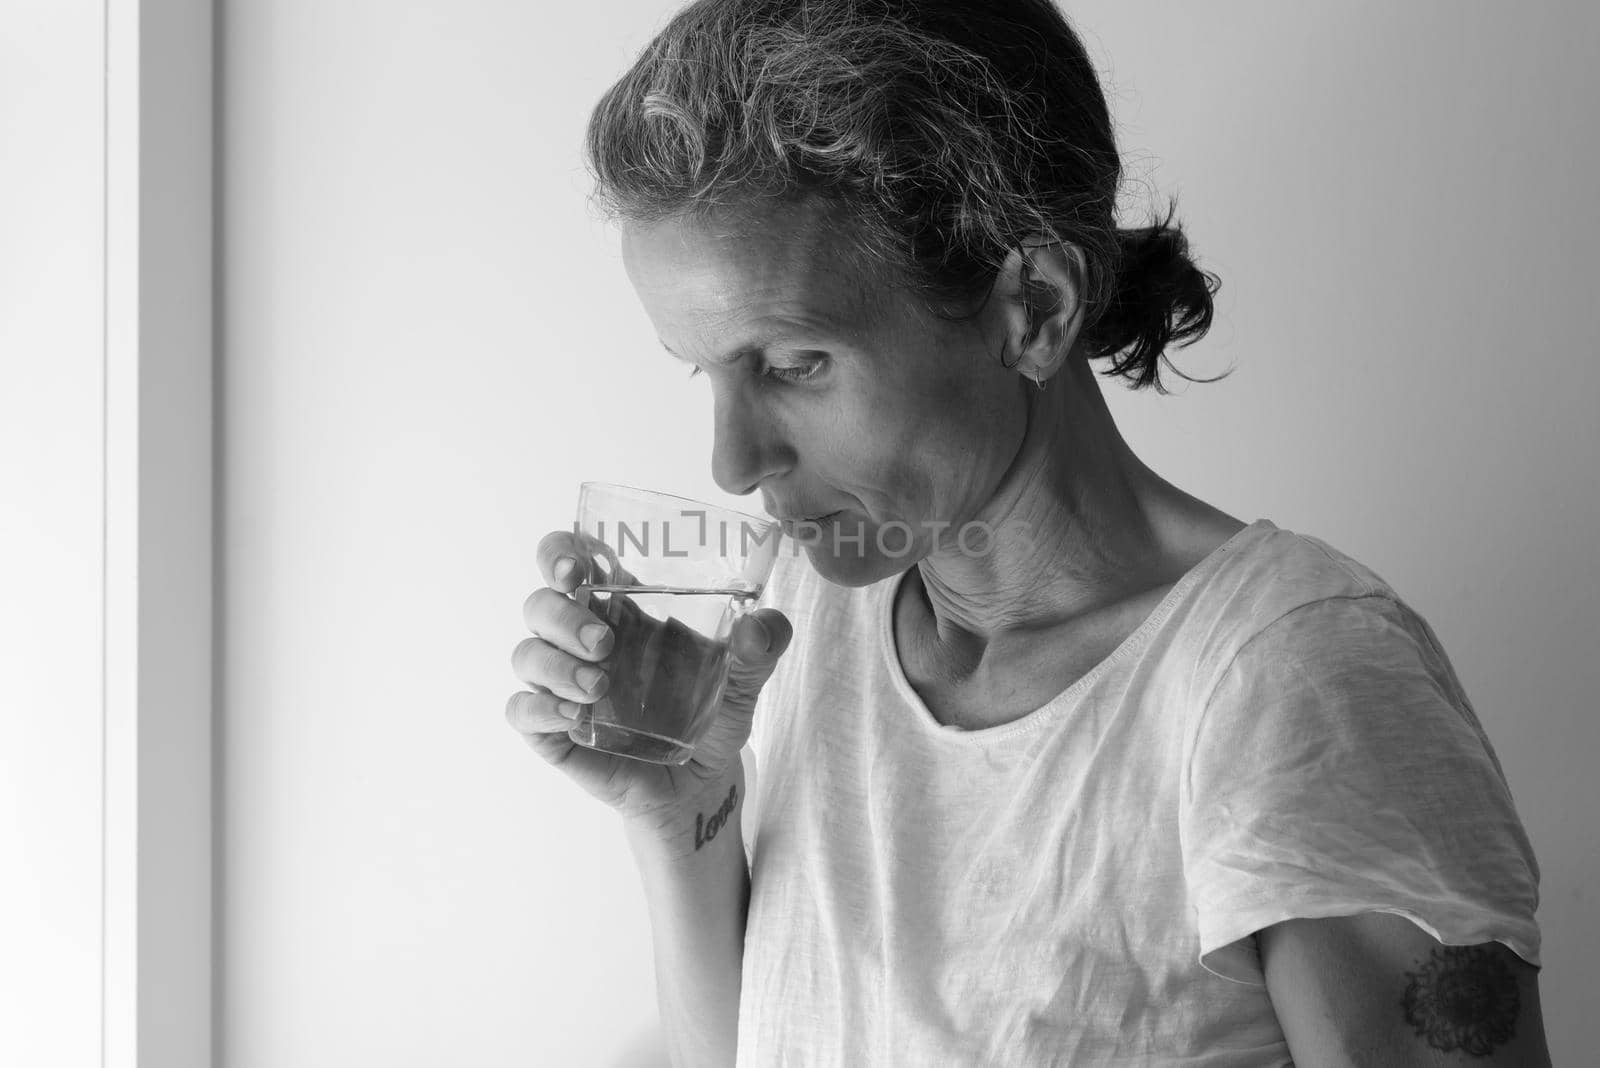 Profile of middle aged woman holding glass and looking pensive - addition concept (black and white)